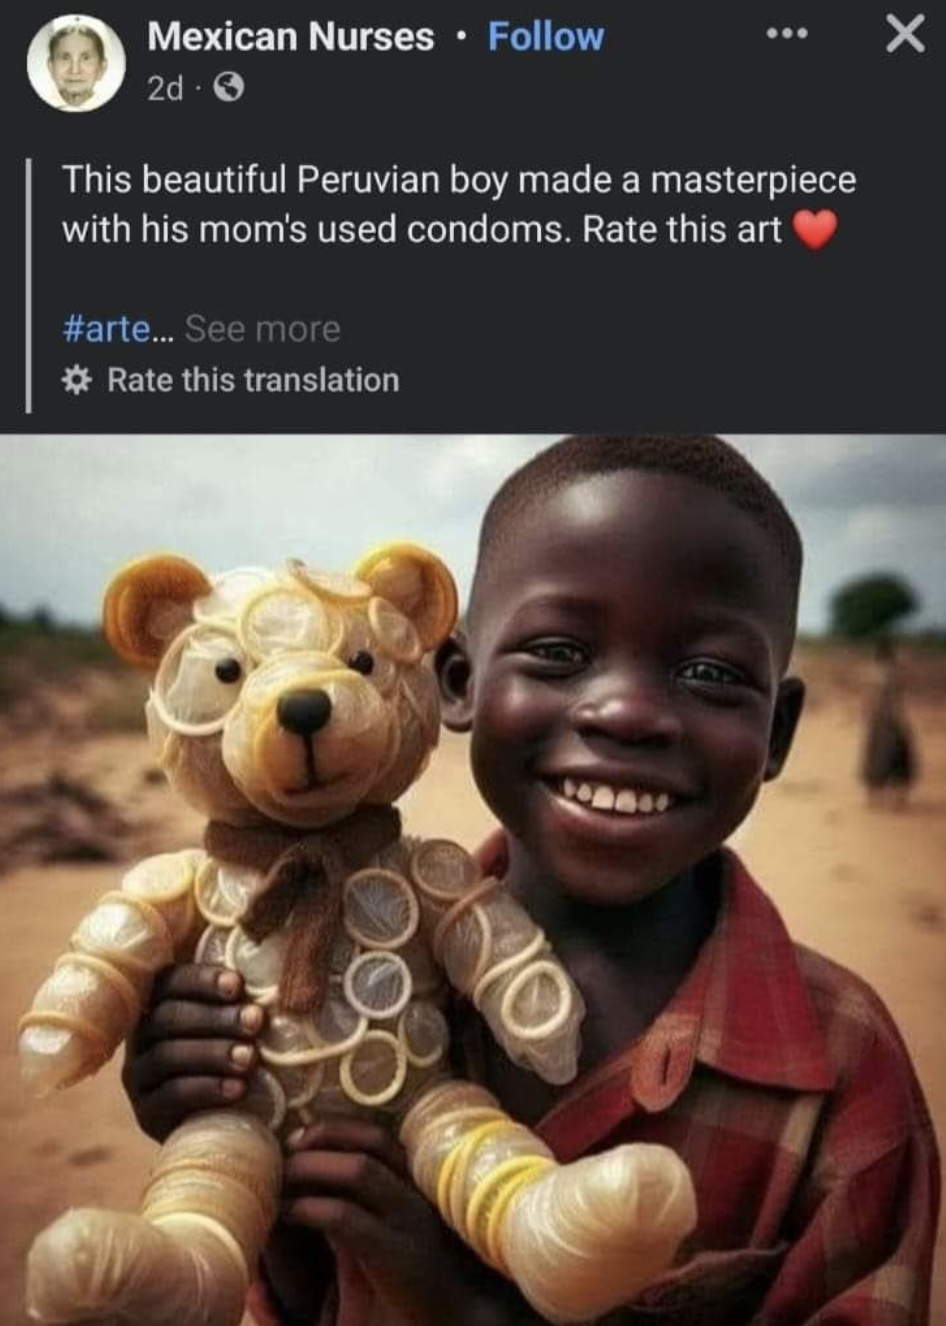 Child - Mexican Nurses 2d. This beautiful Peruvian boy made a masterpiece with his mom's used condoms. Rate this art ... See more Rate this translation